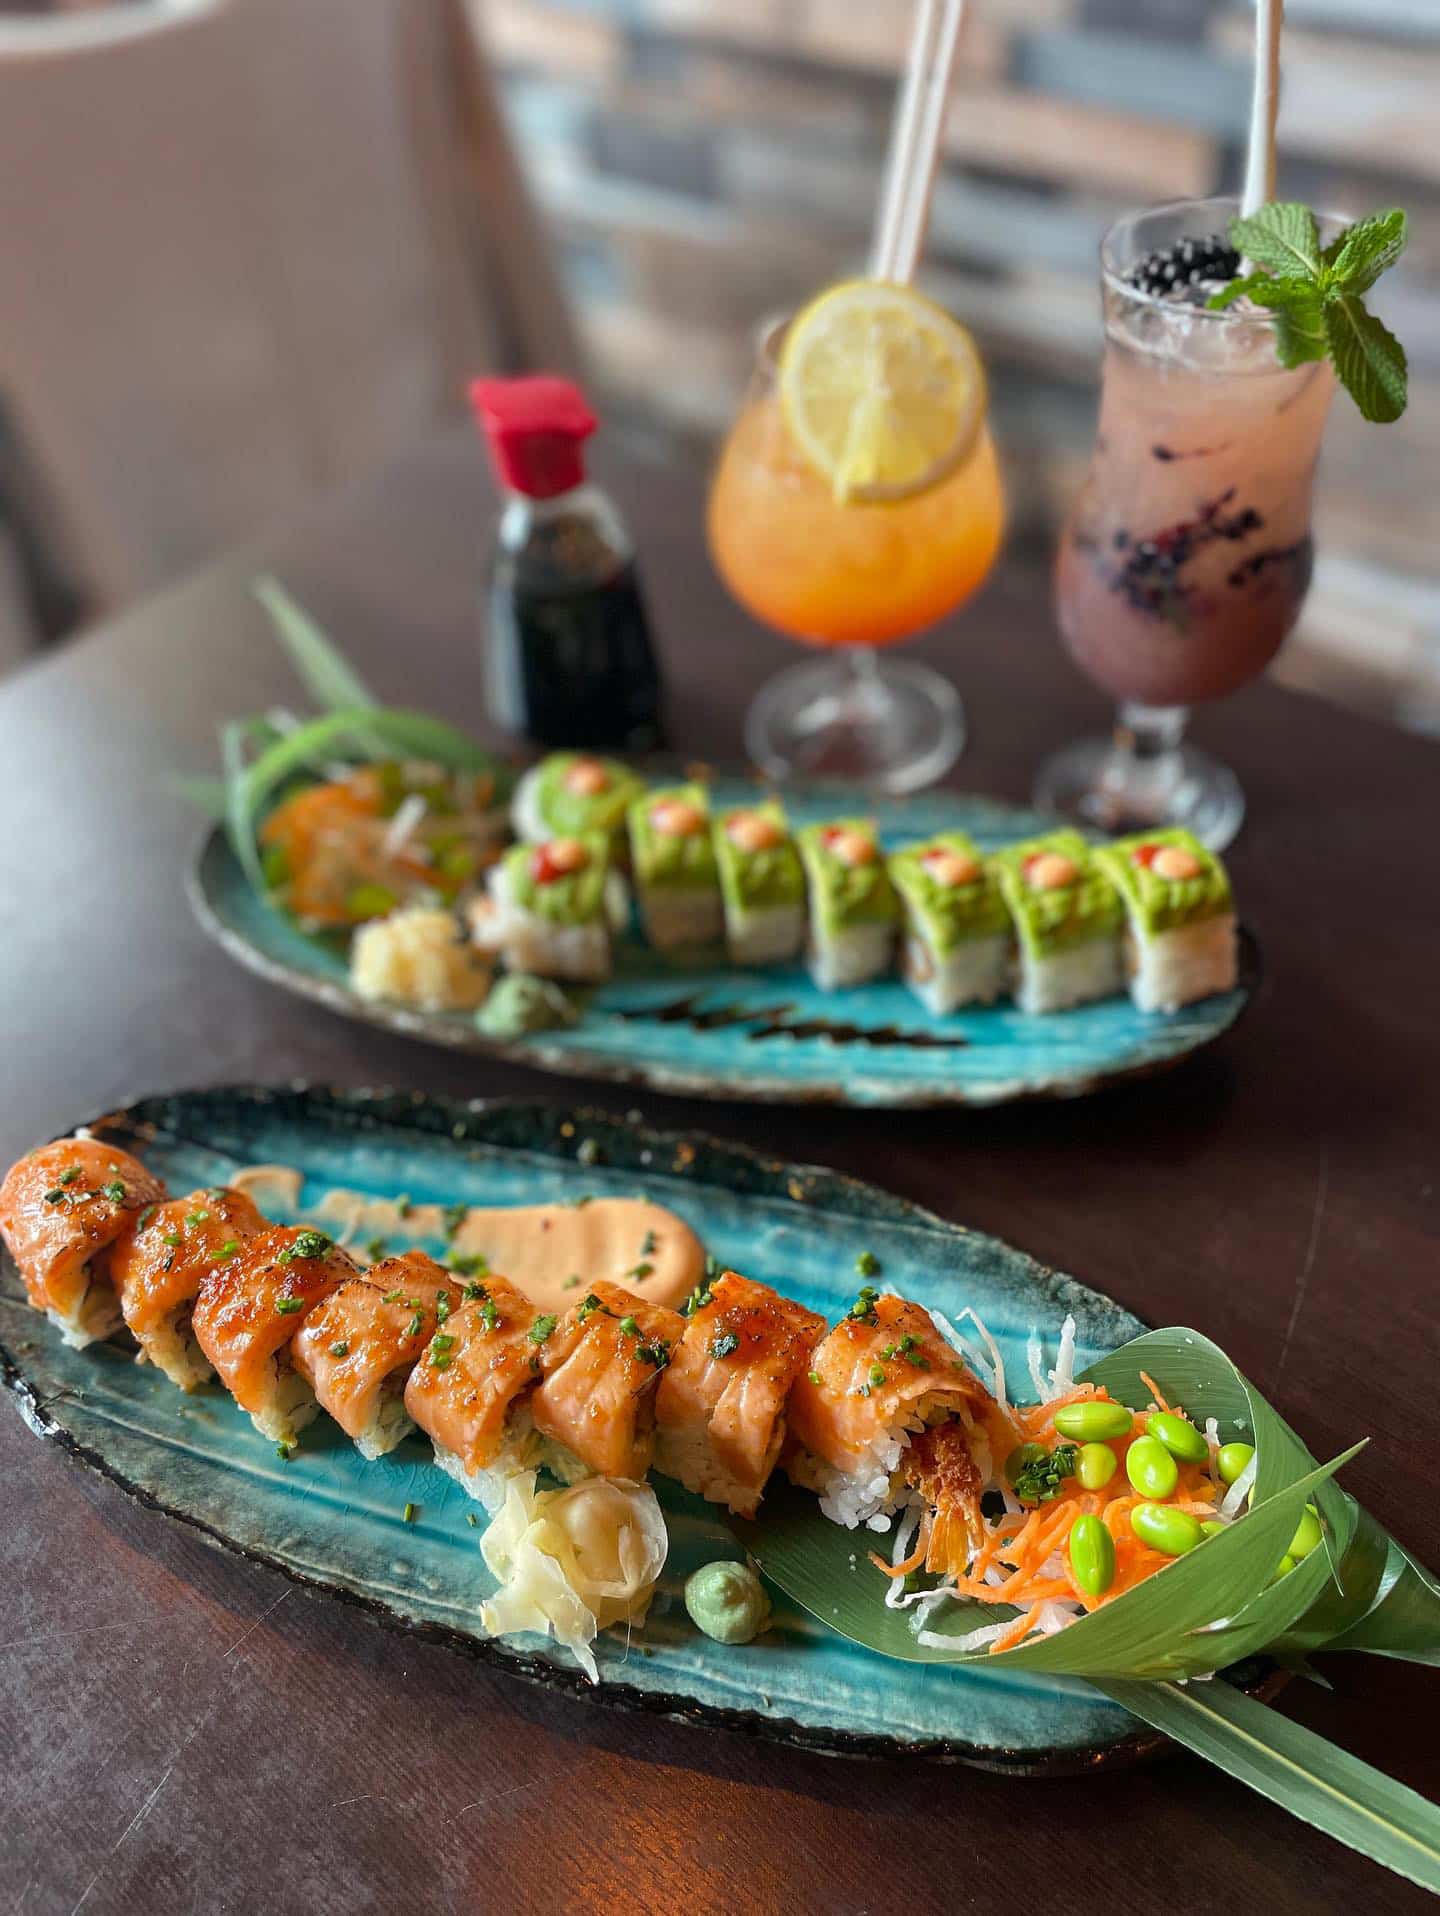 Two plates with sushi and drinks. One plate has a variety of sushi rolls, while the other has a selection of colorful beverages.